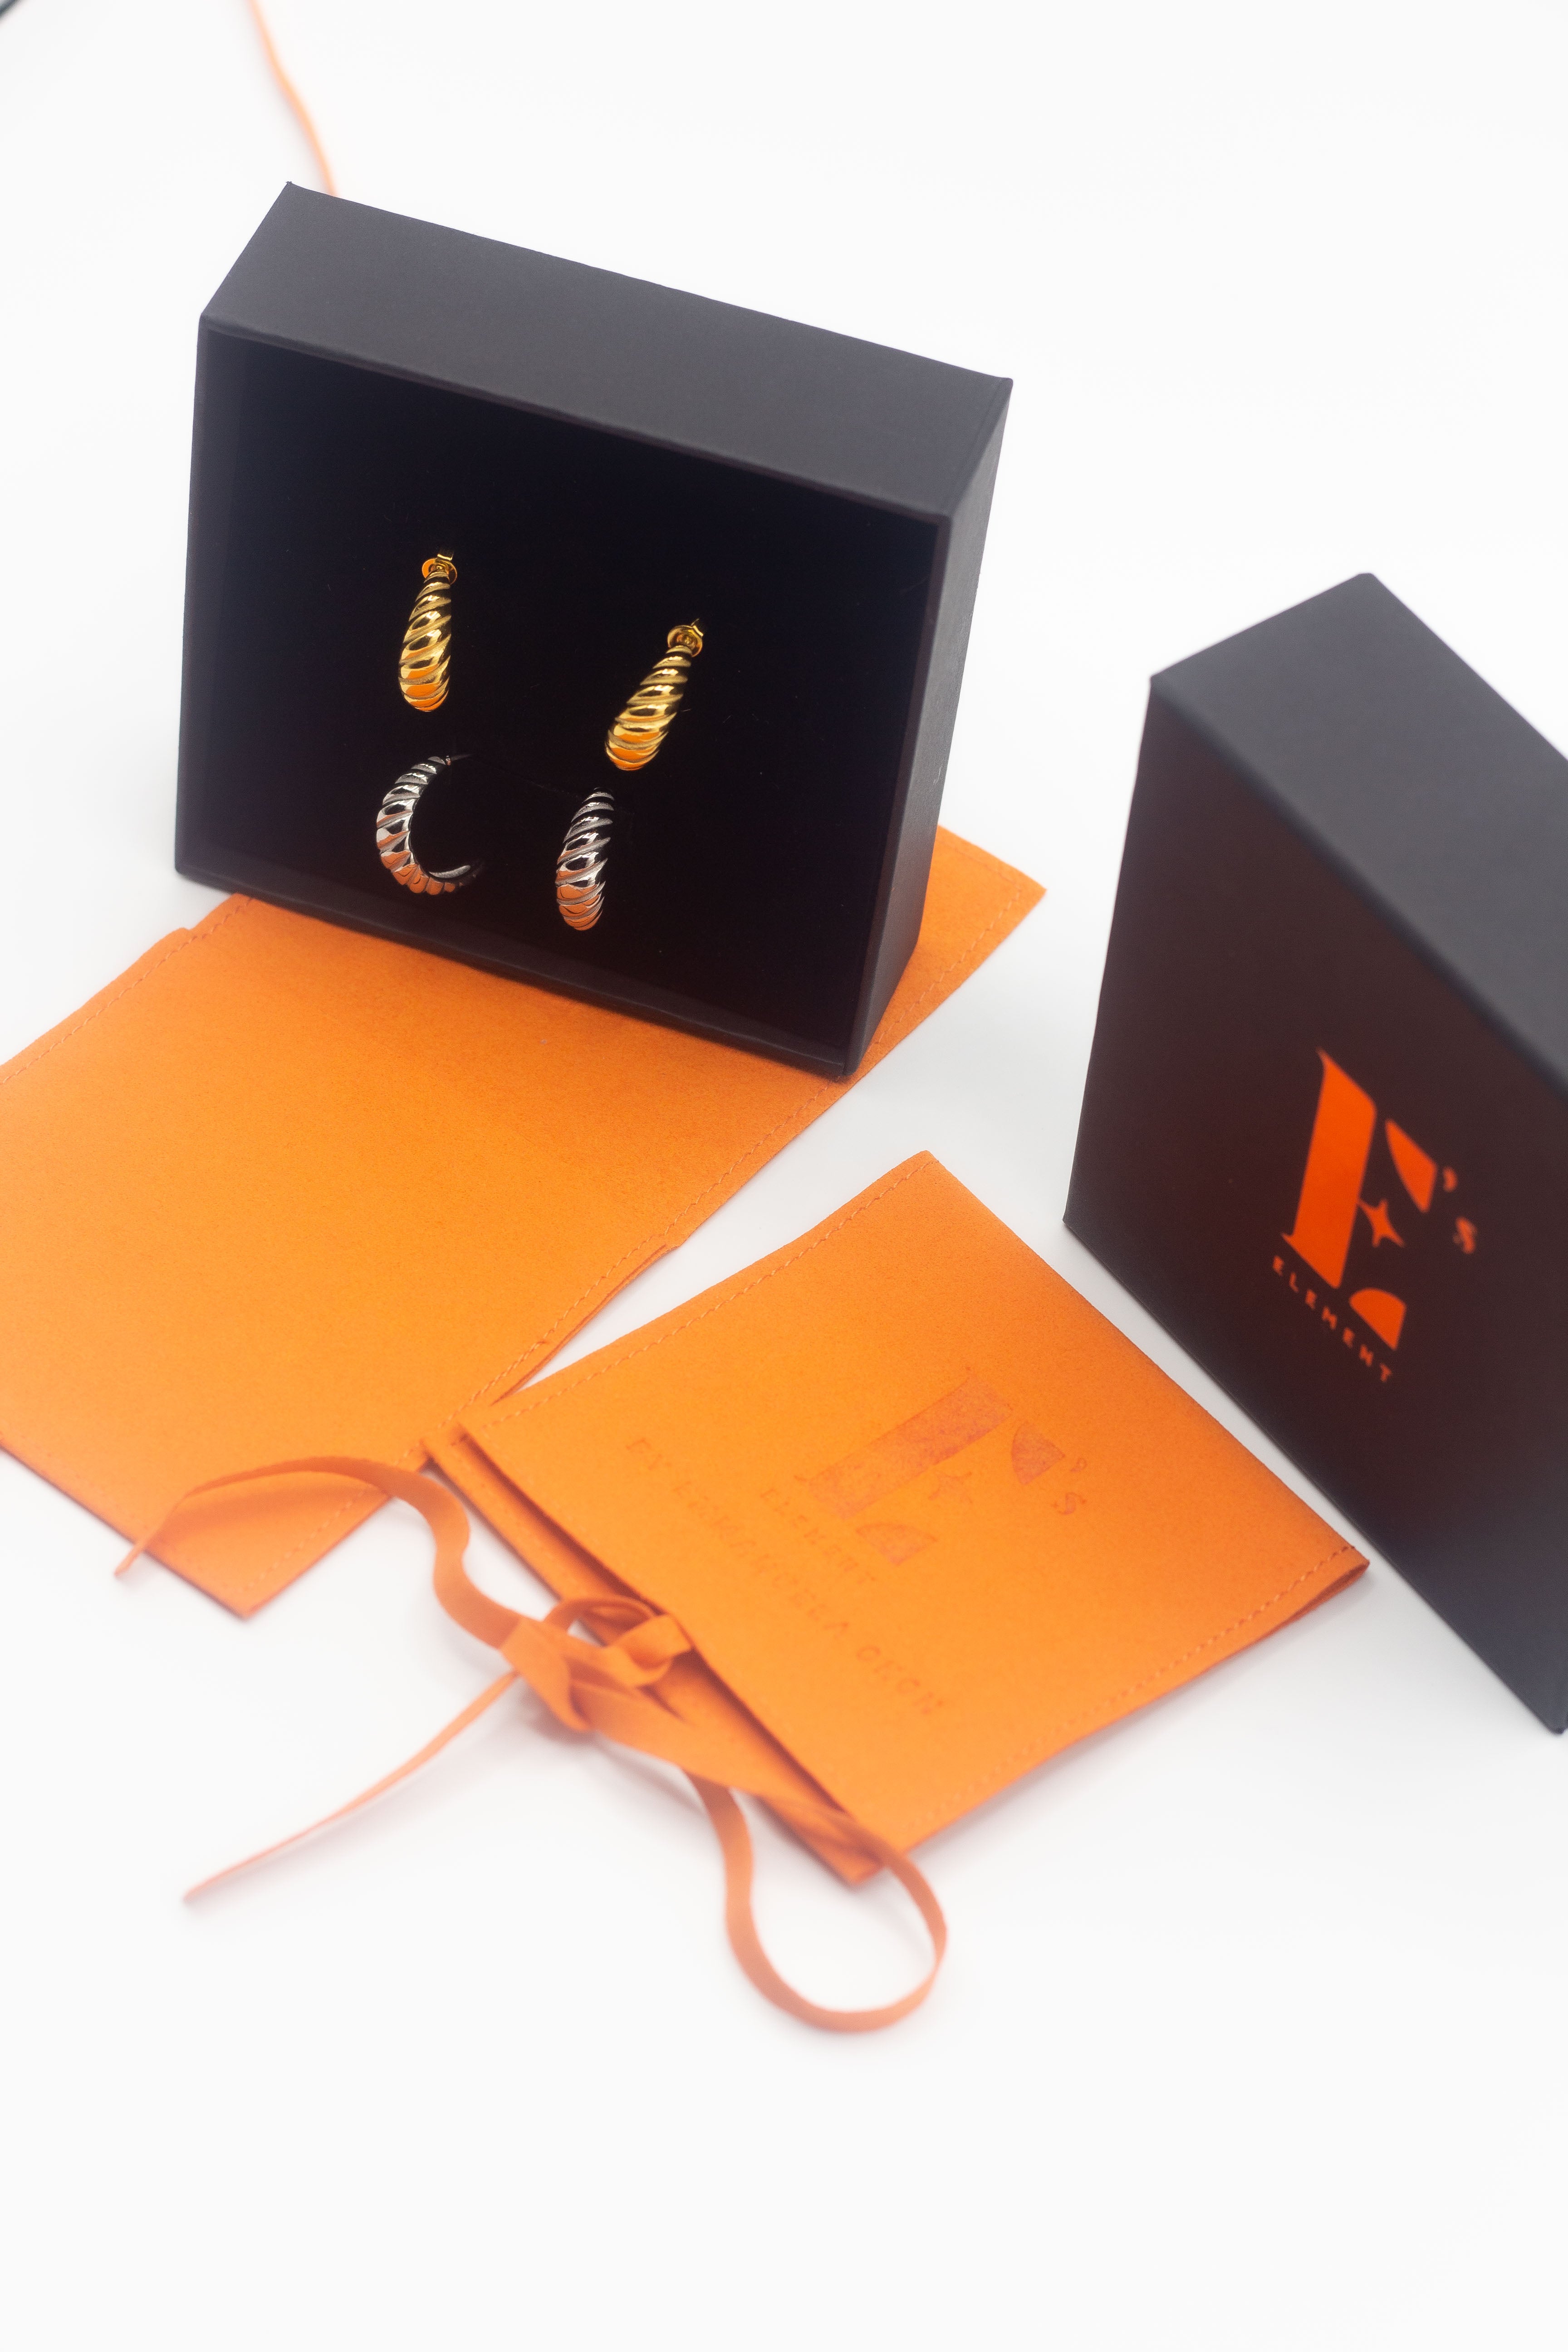 18k gold and silver earrings placed in a black opened container on the left. On the right is the cap for the container with the E's Element logo in gold. Under the box and cap are orange leather pouches. Thick Croissant Stud Earrings - E's Element.